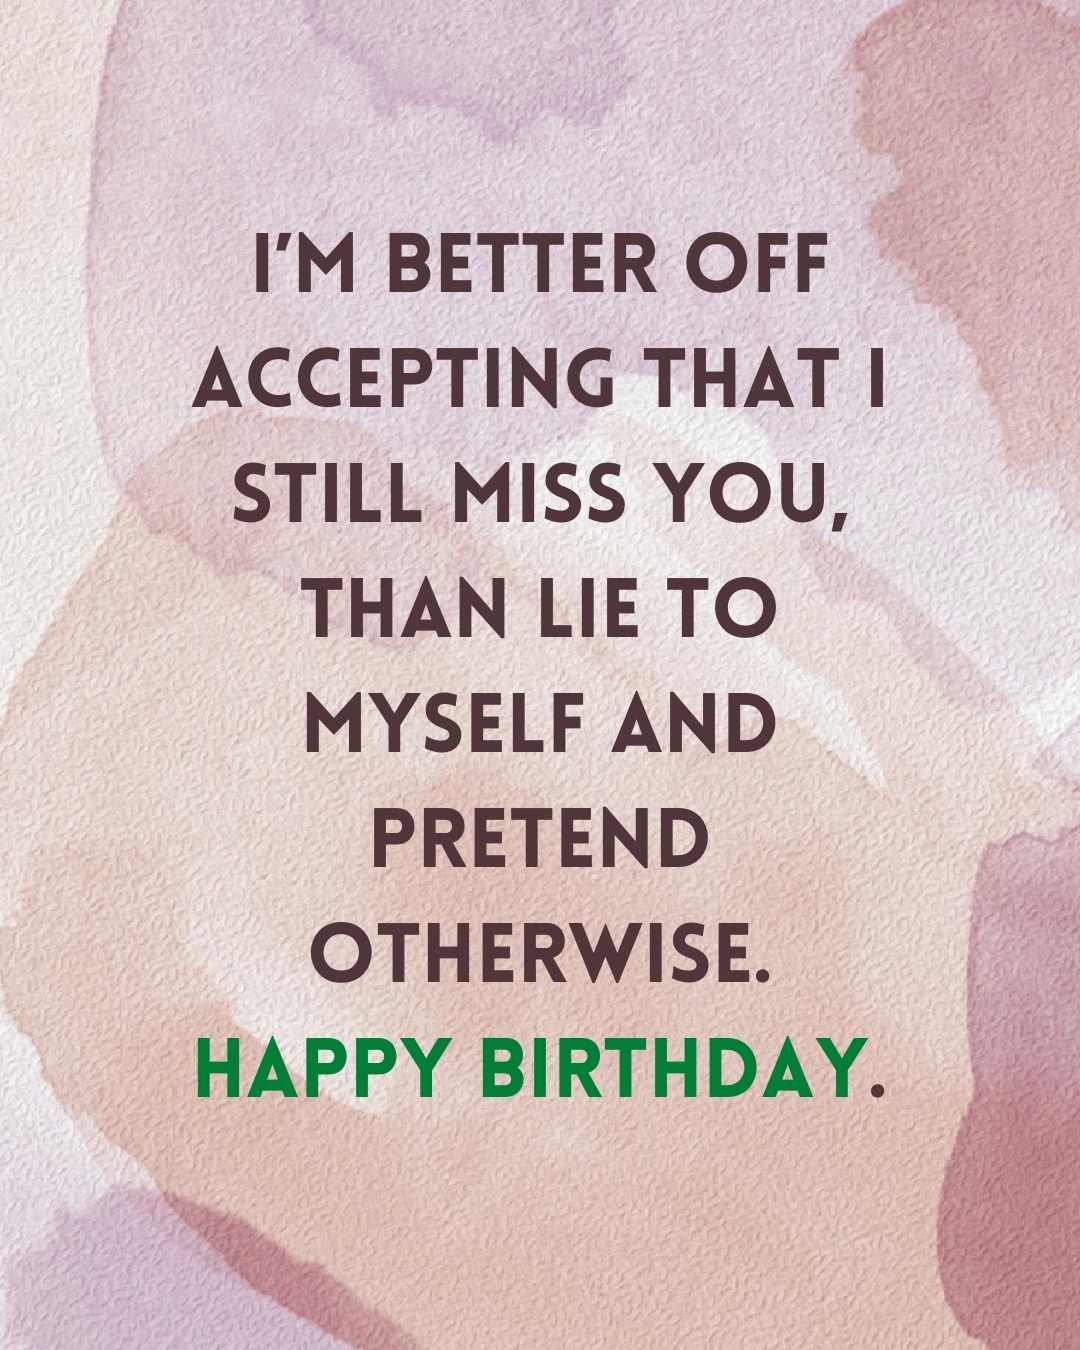 i’m better off accepting that i still miss you, than lie to myself and pretend otherwise happy birthday